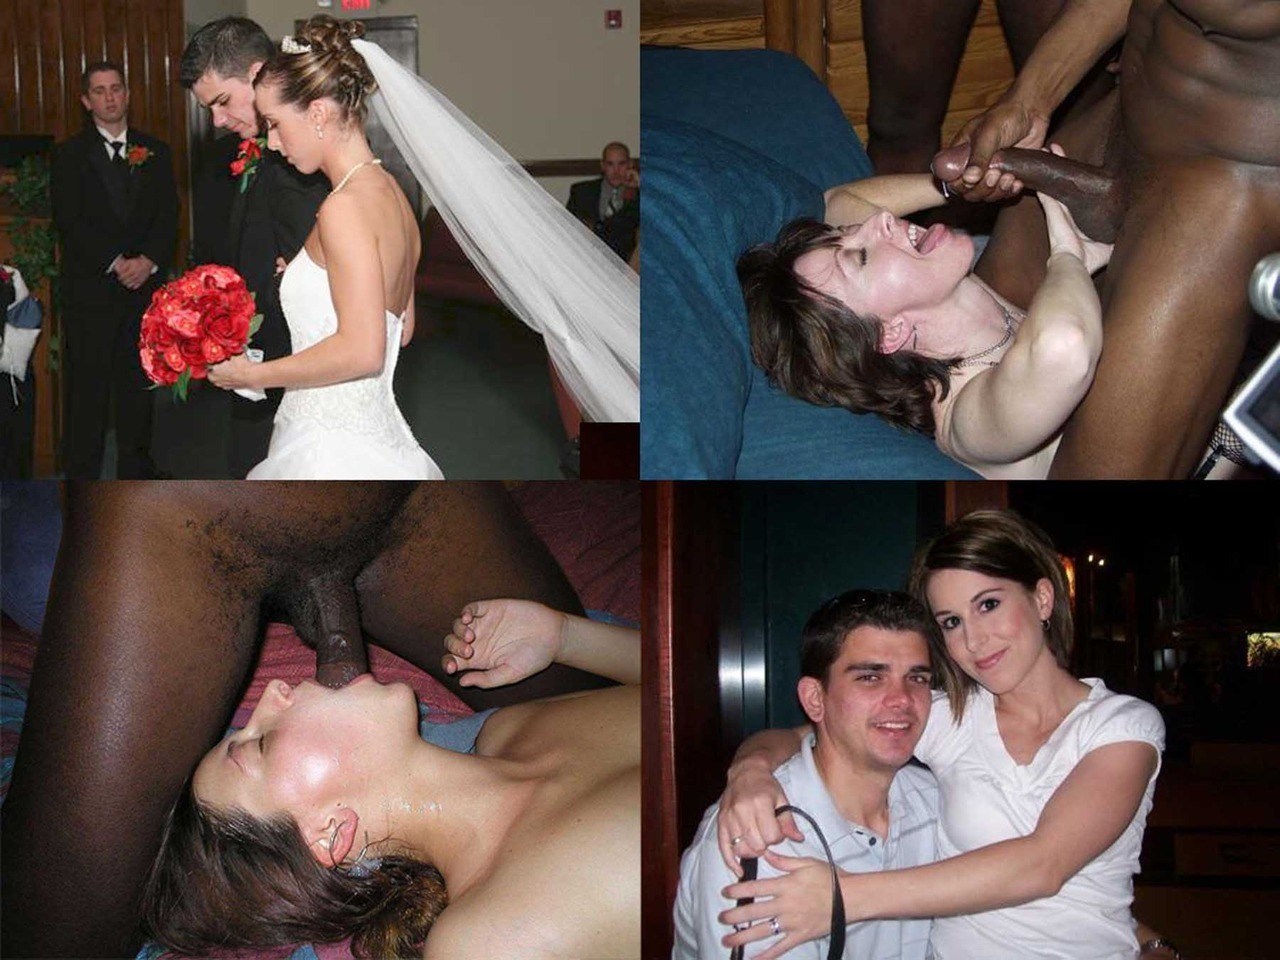 Sex with his wife on their wedding night (49 photos) picture